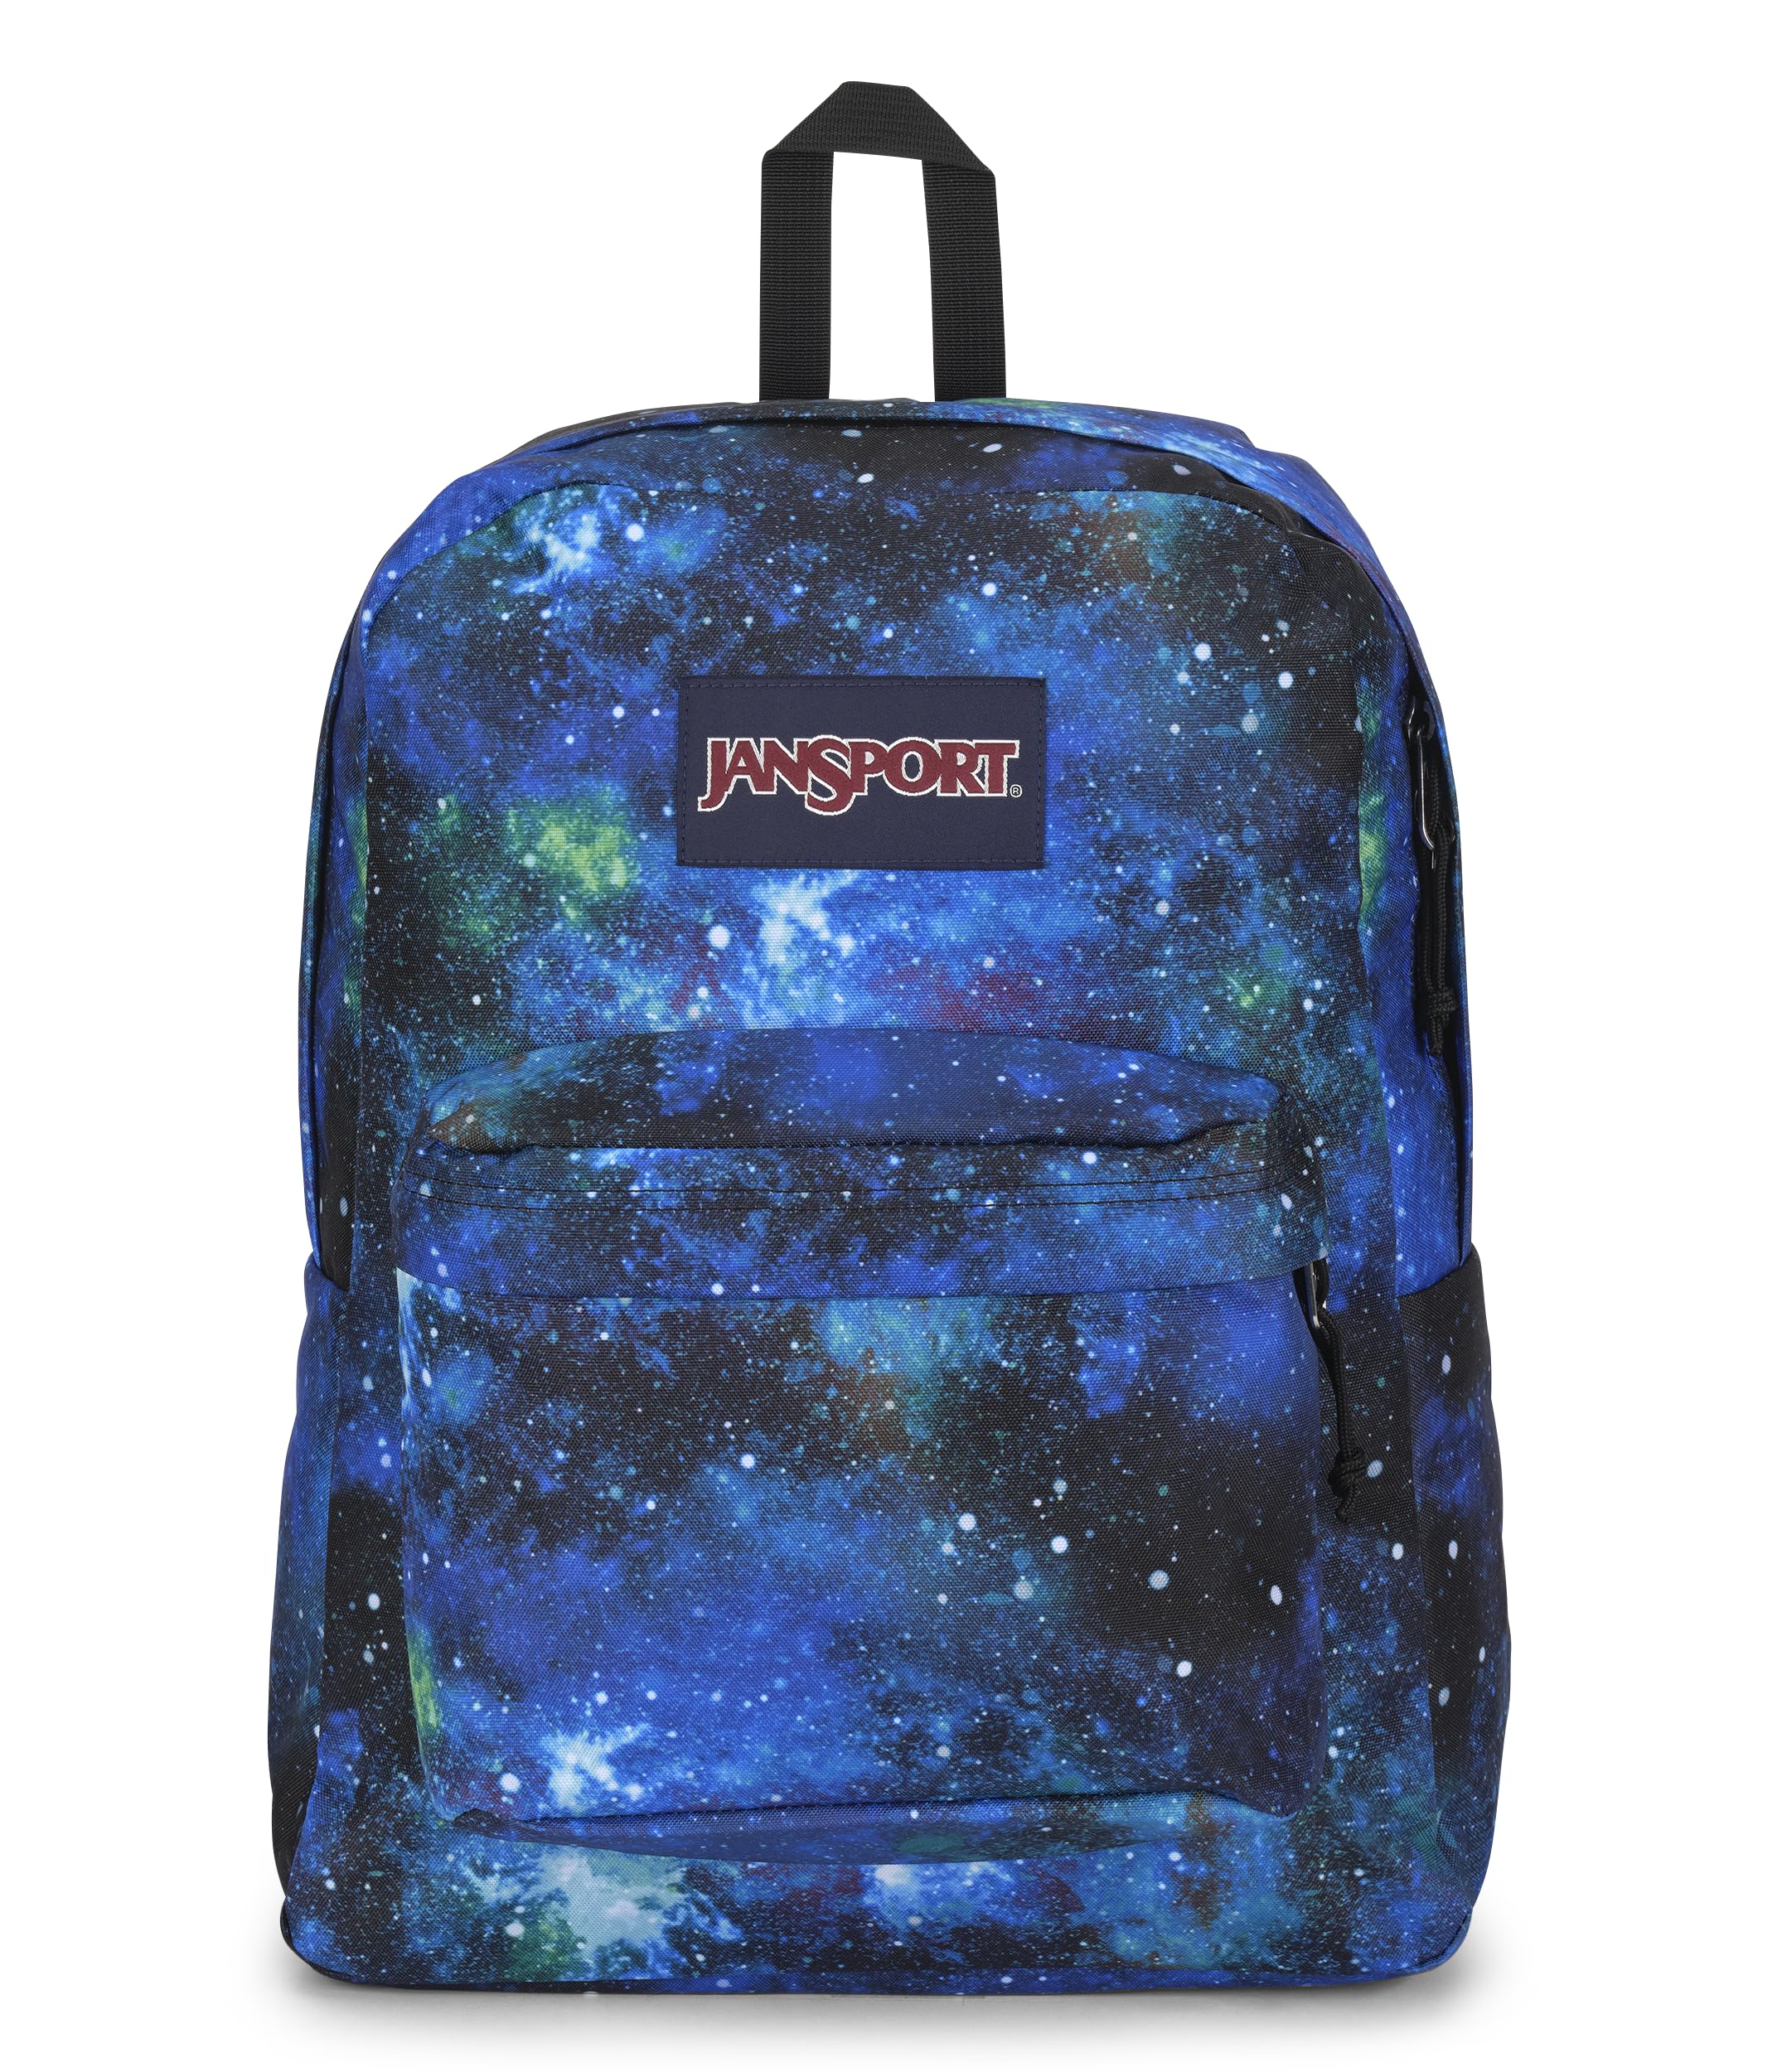 JanSport SuperBreak One Backpacks - Durable, Lightweight Bookbag with 1 Main Compartment, Front Utility Pocket with Built-in Organizer - Premium Backpack, Galaxy